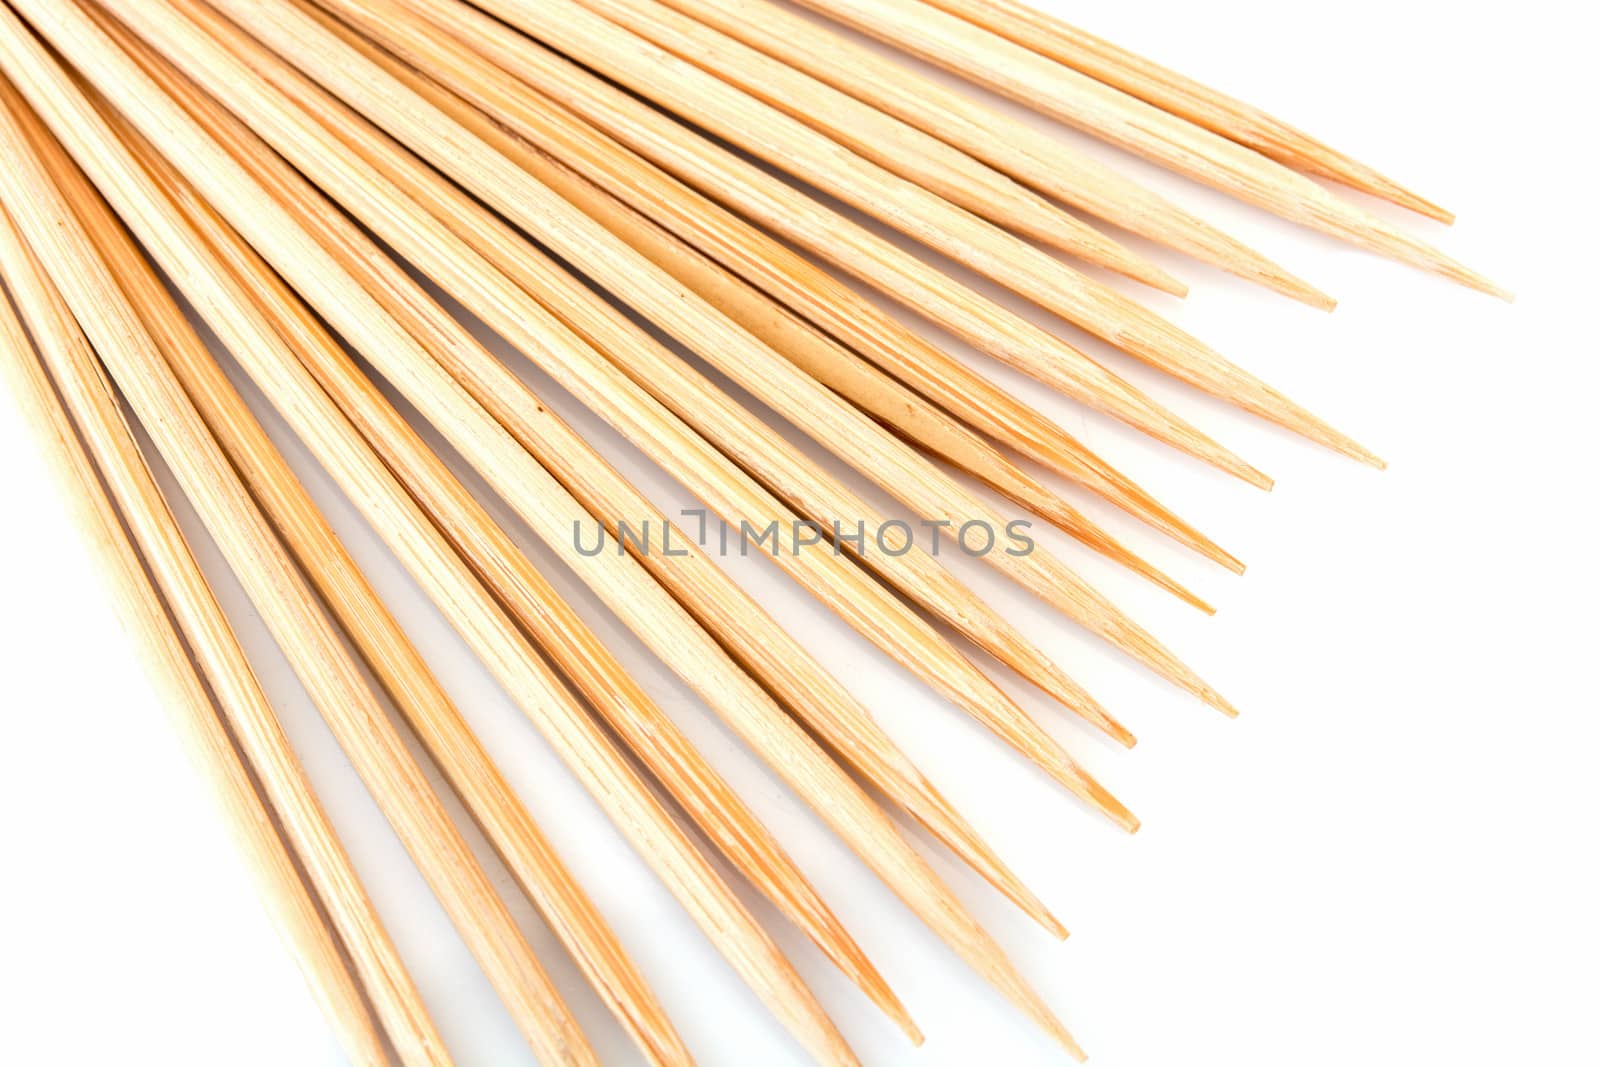 Bamboo toothpicks isolated and on white background